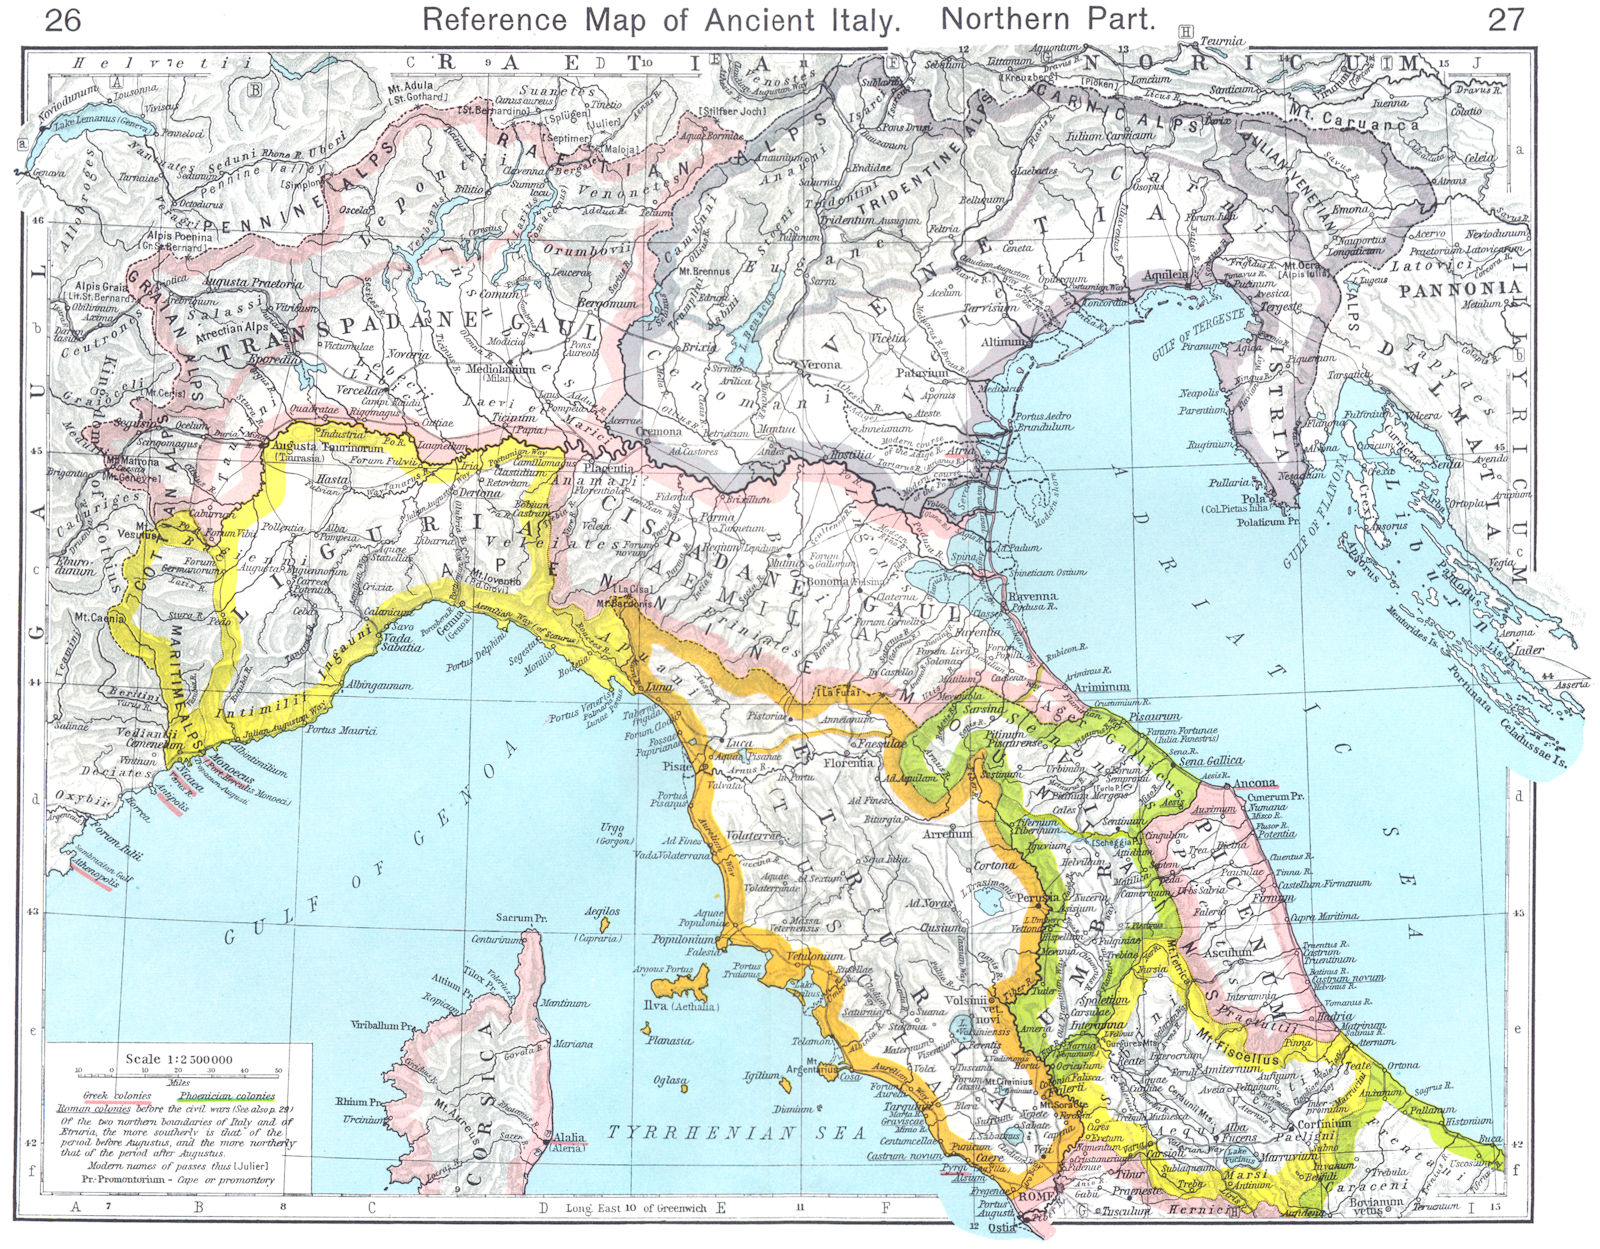 Associate Product ITALY. Reference Map of Ancient Italy Northern Part 1956 old vintage chart